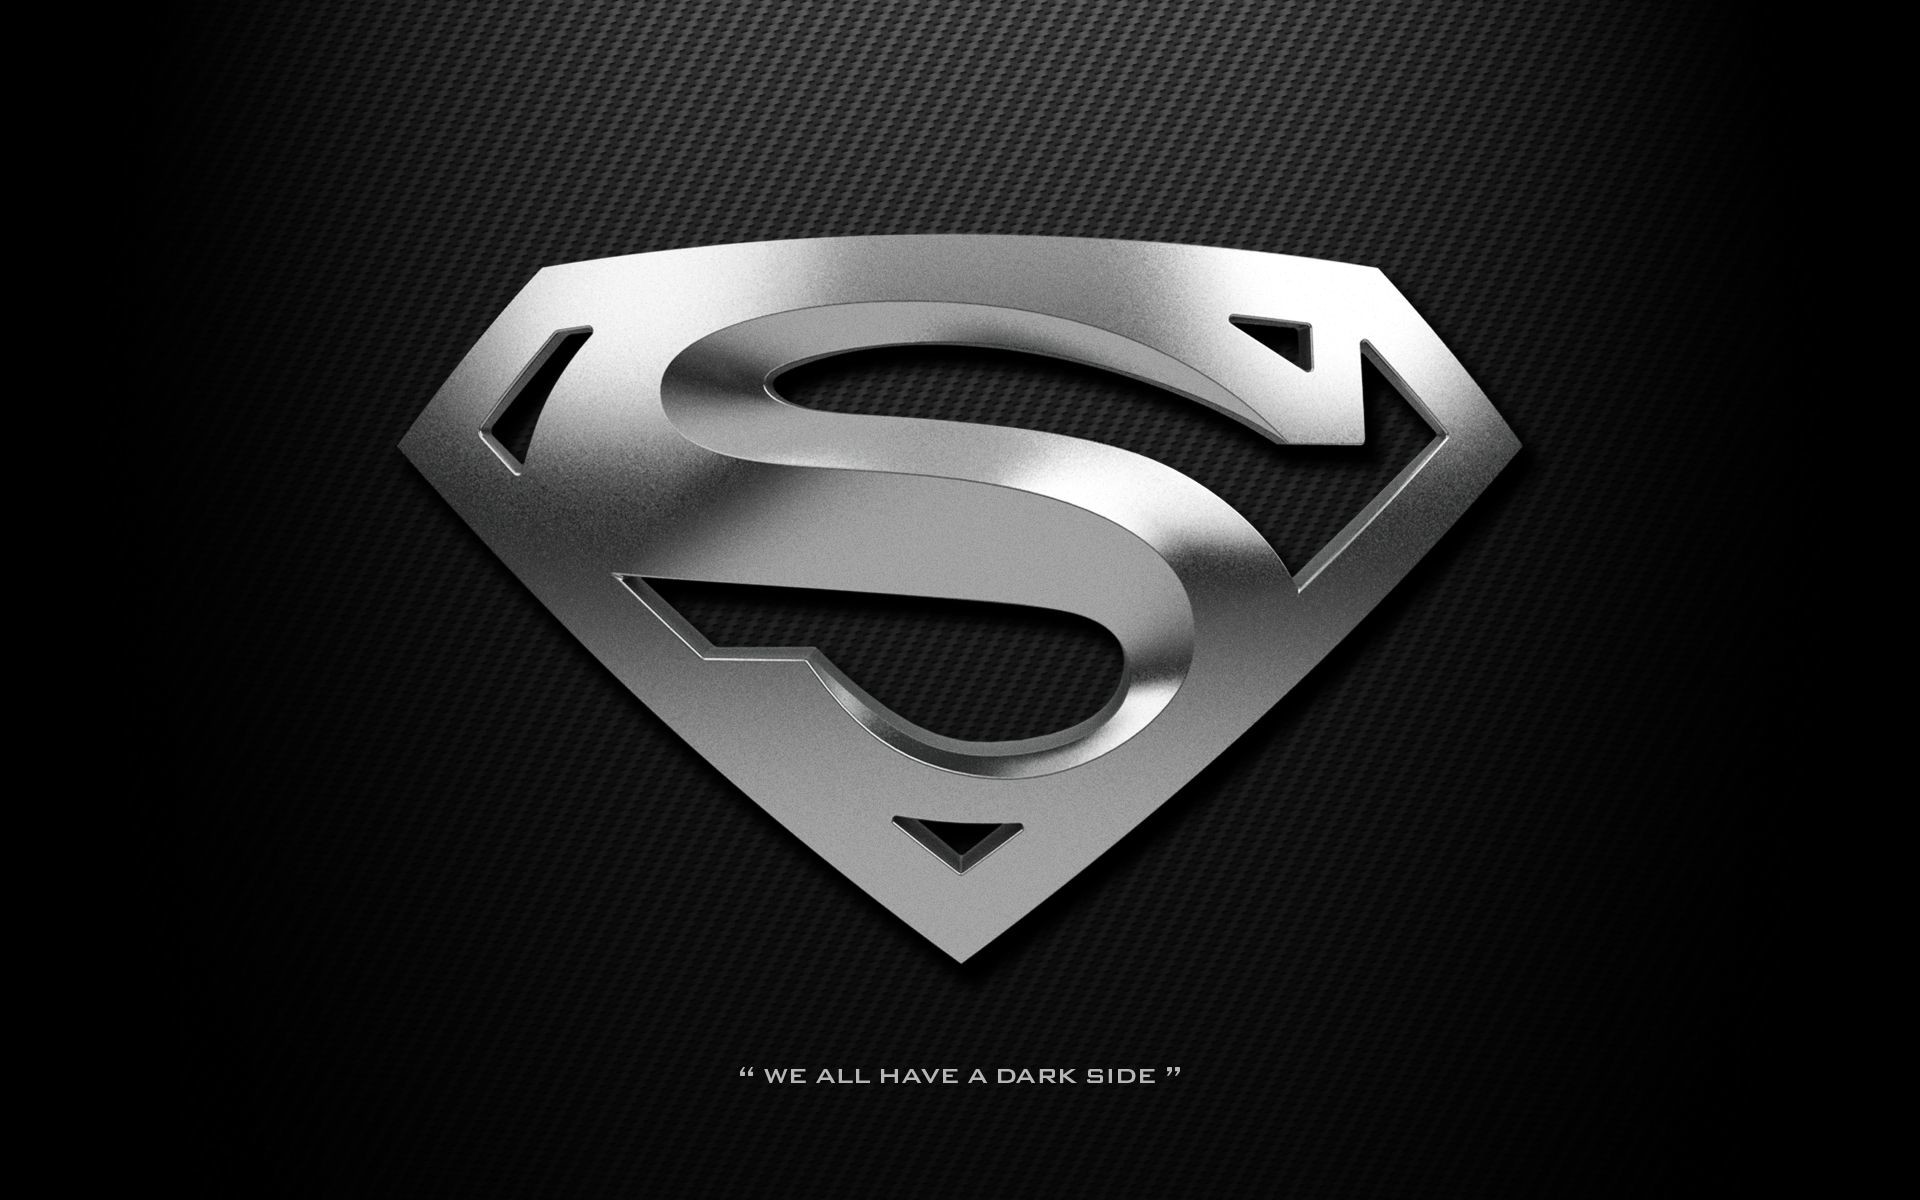 1920x1200 Silver Superman Shield "We all have a dark side"